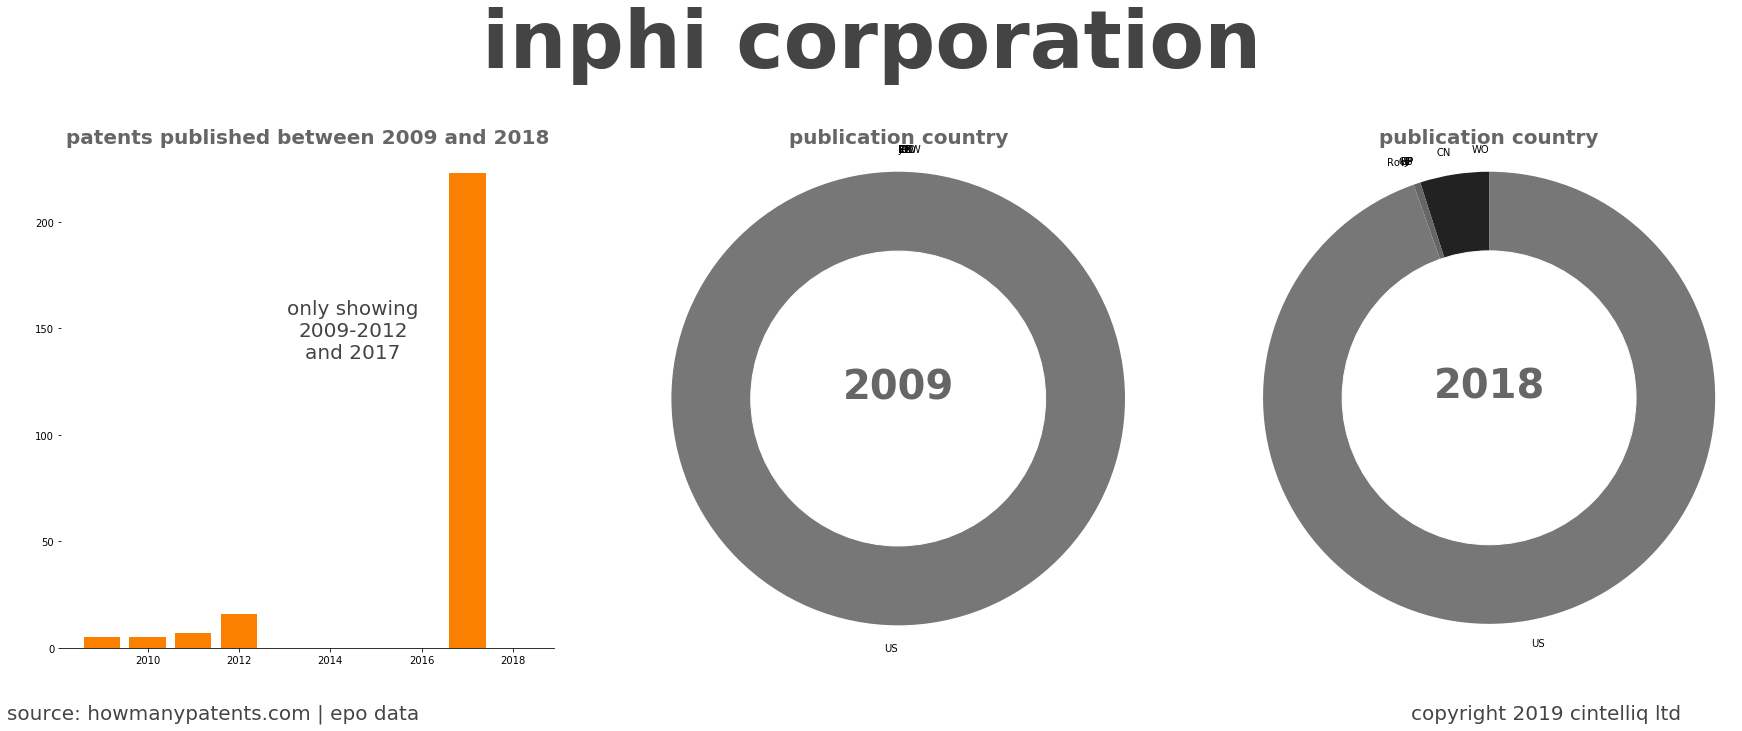 summary of patents for Inphi Corporation